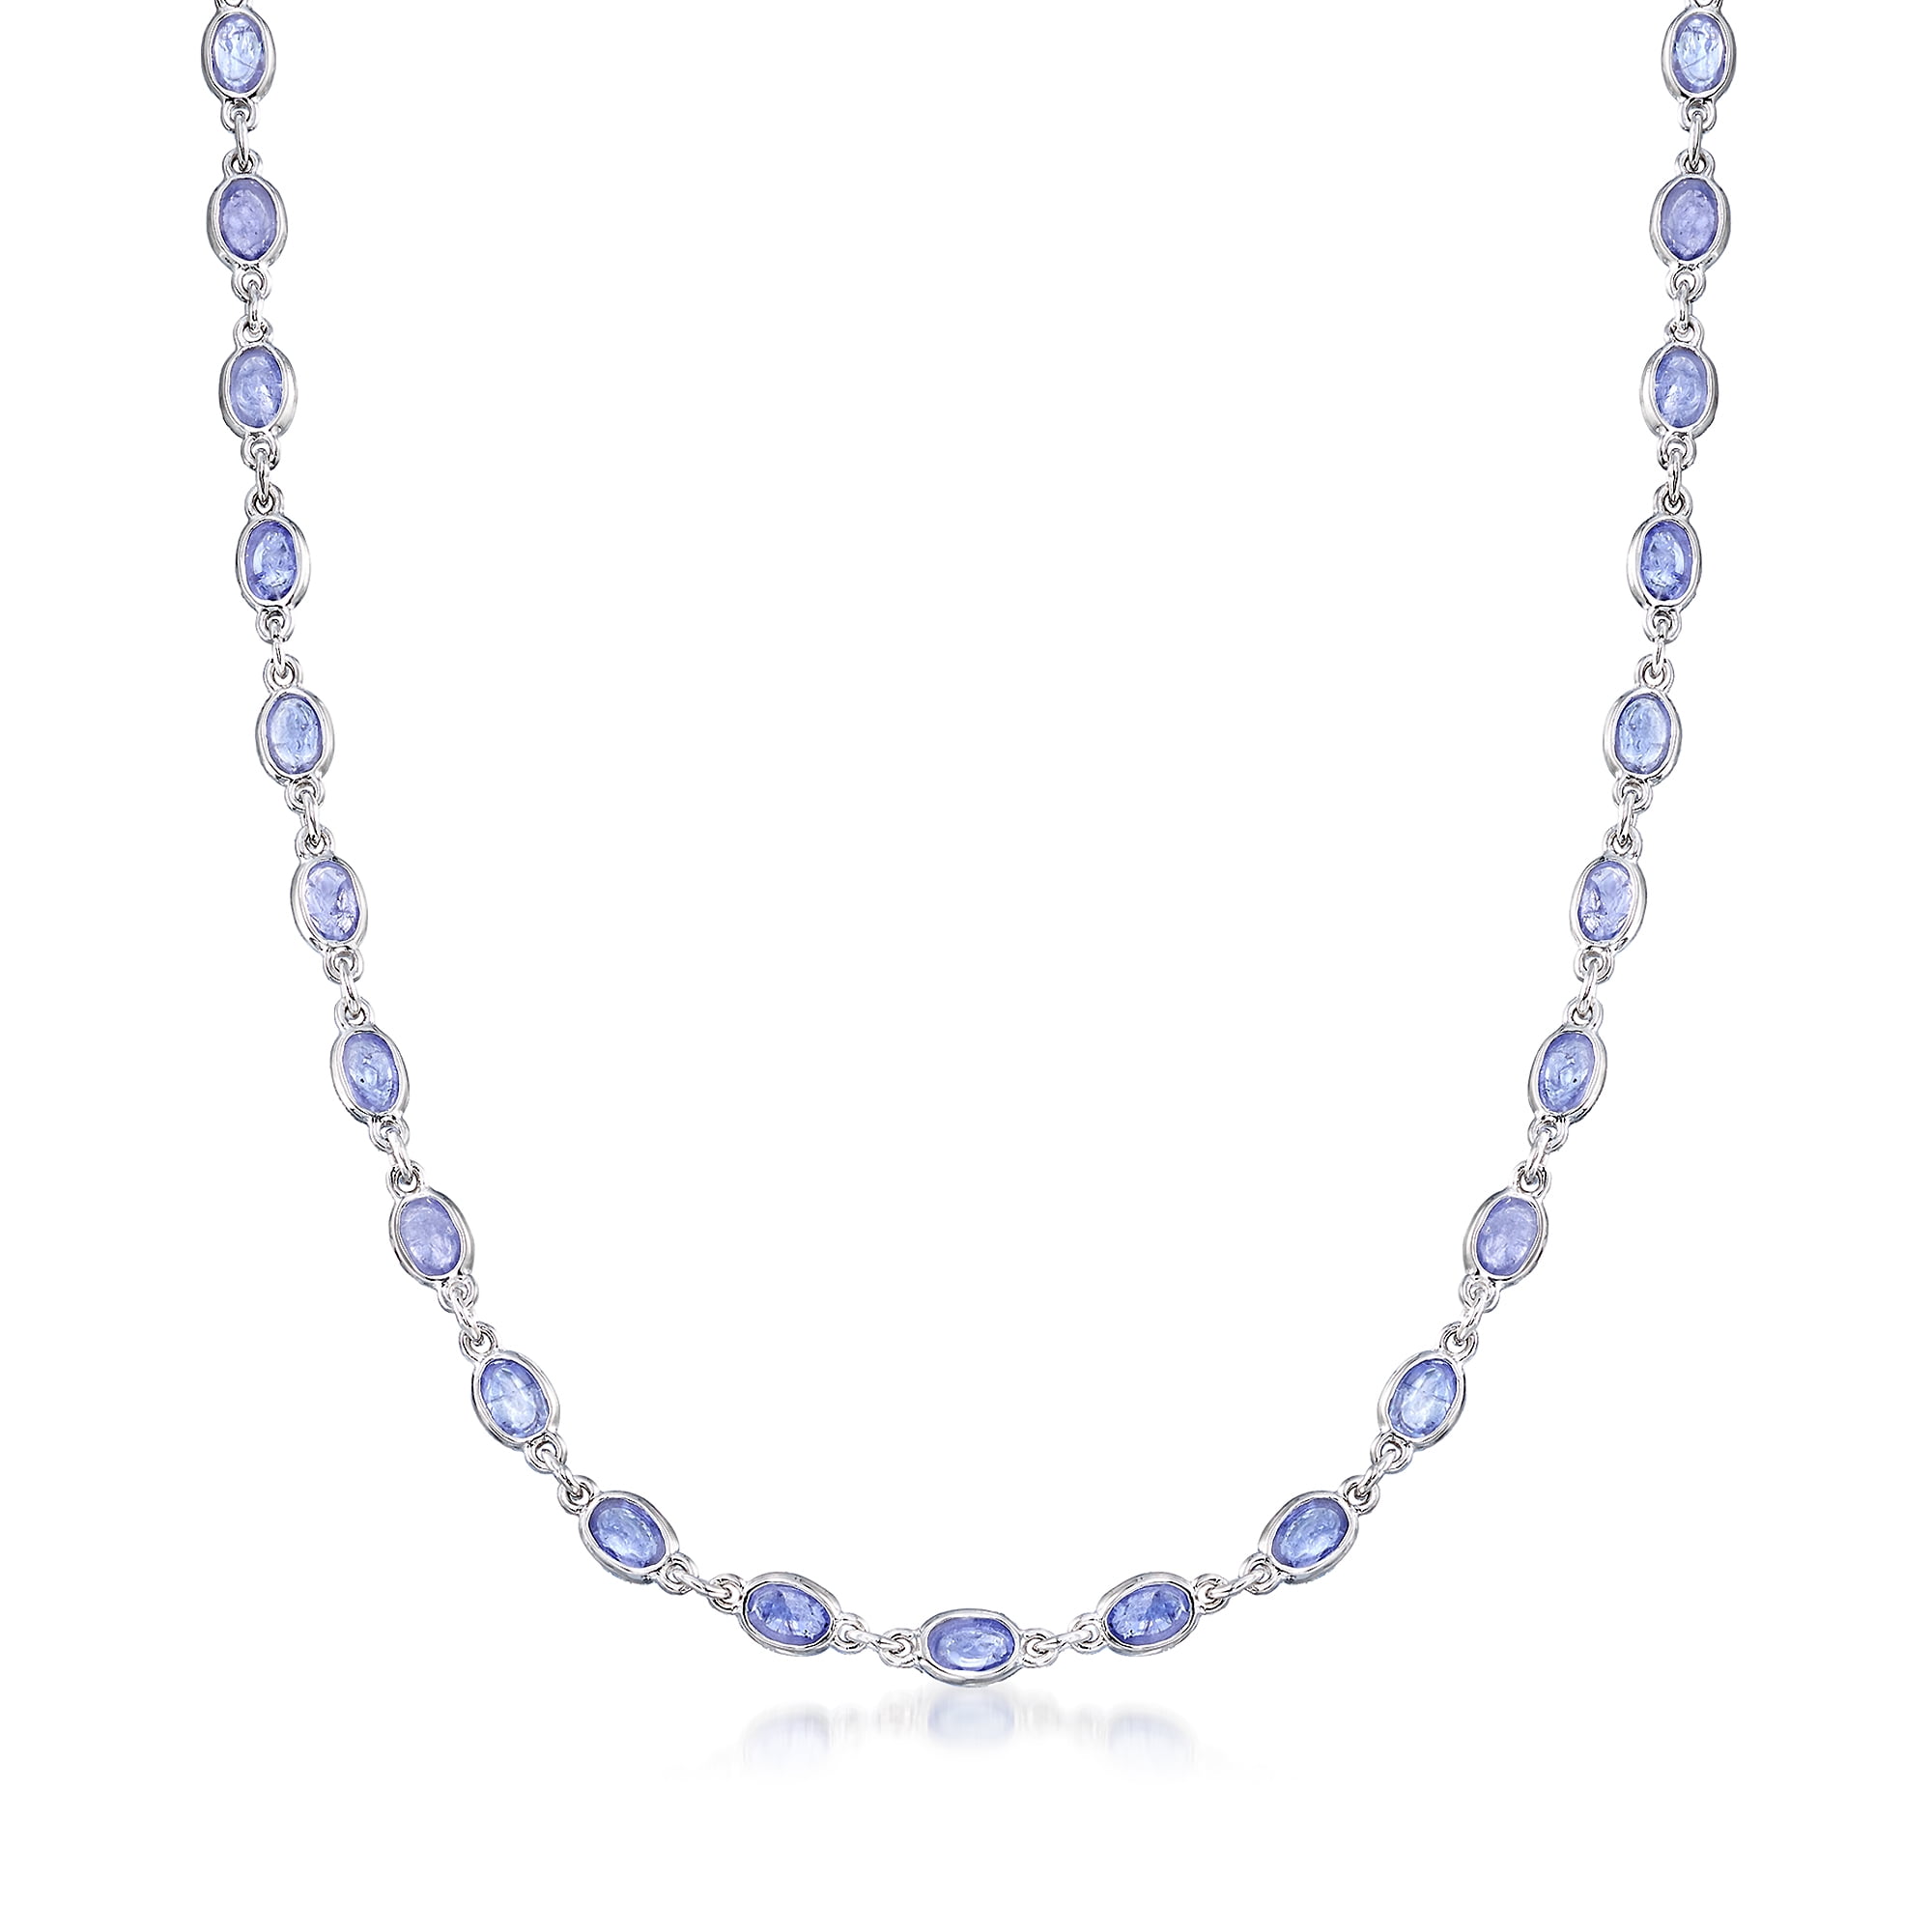 Ross-Simons 19.00 ct. t.w. Tanzanite Station Necklace in Sterling Silver,  Women's, Adult